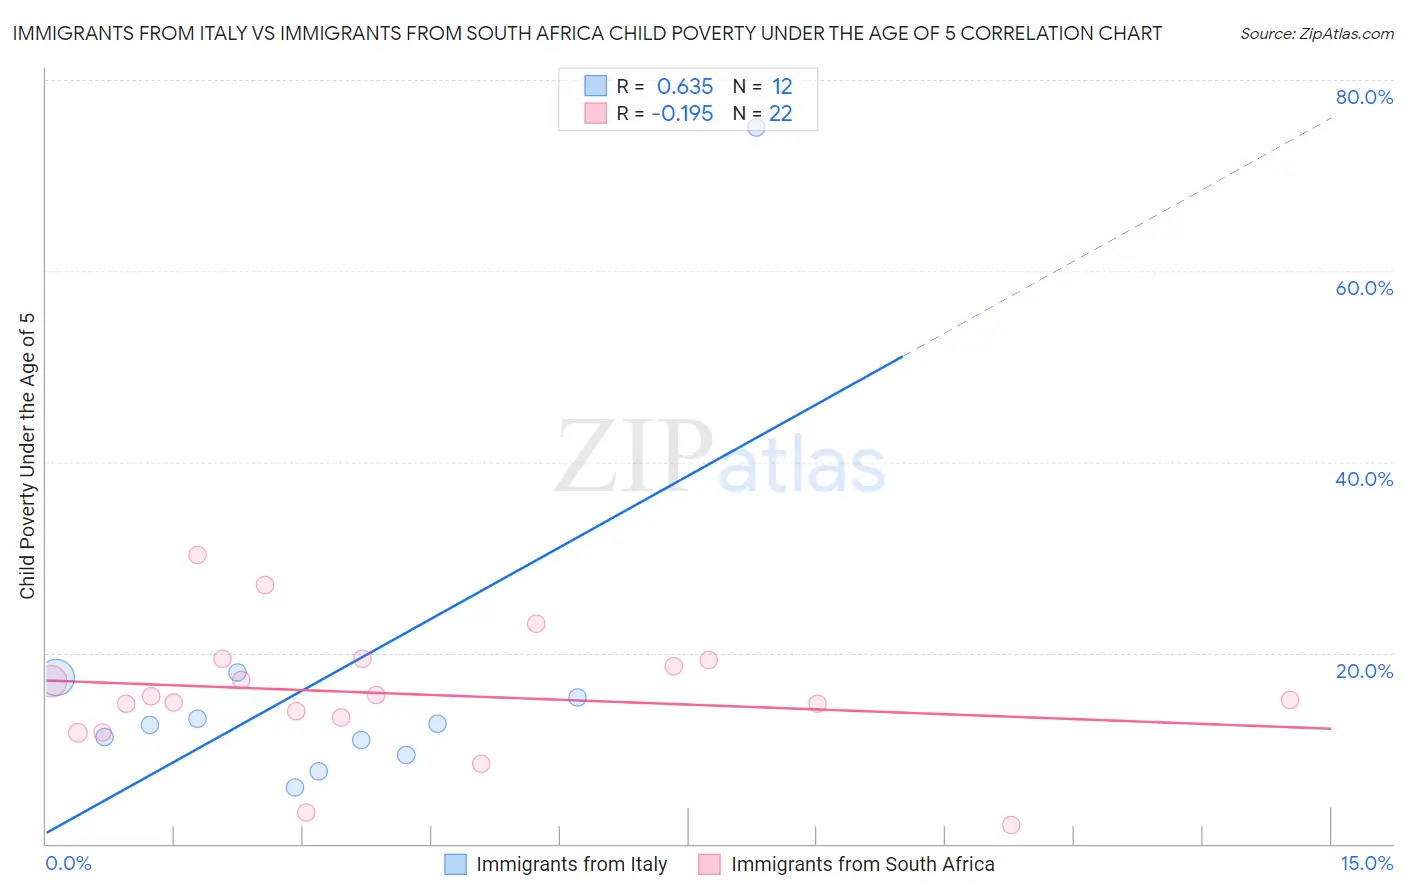 Immigrants from Italy vs Immigrants from South Africa Child Poverty Under the Age of 5